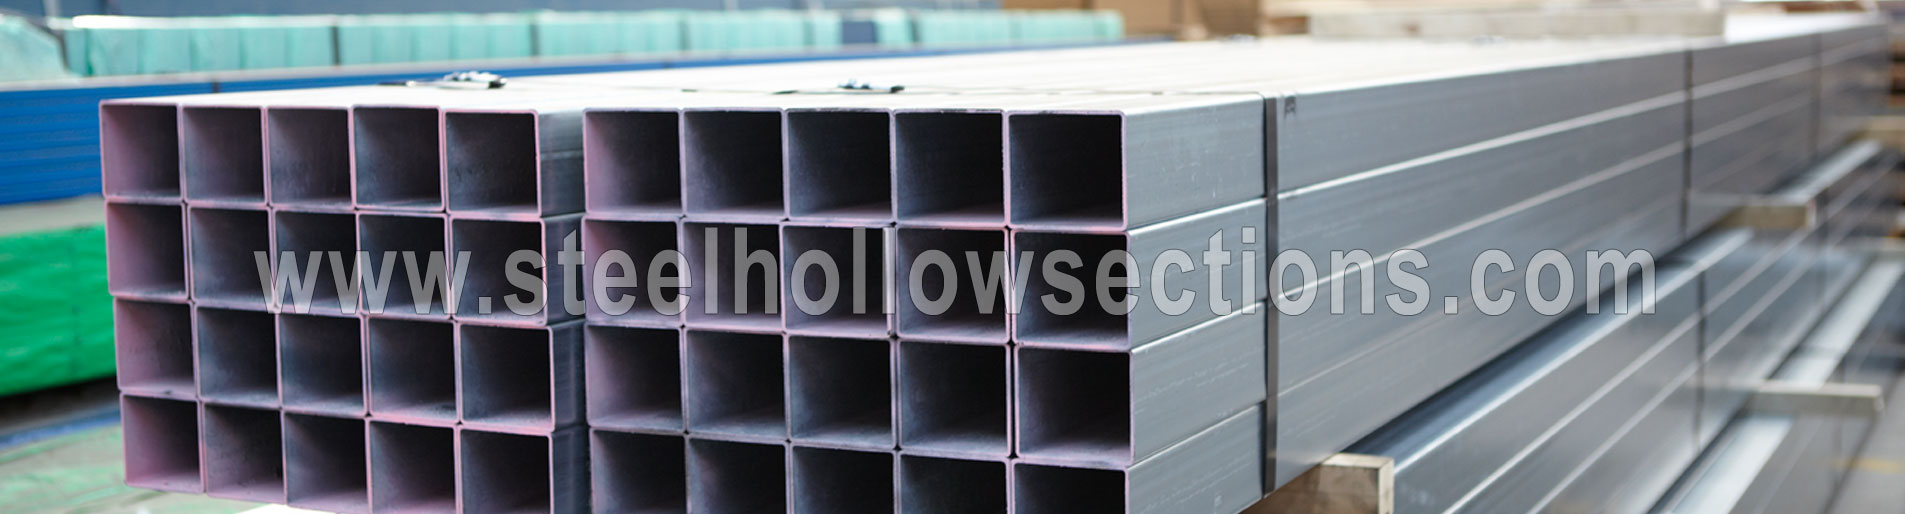 Hollow Section Rectangular Pipe Suppliers Dealers Distributors